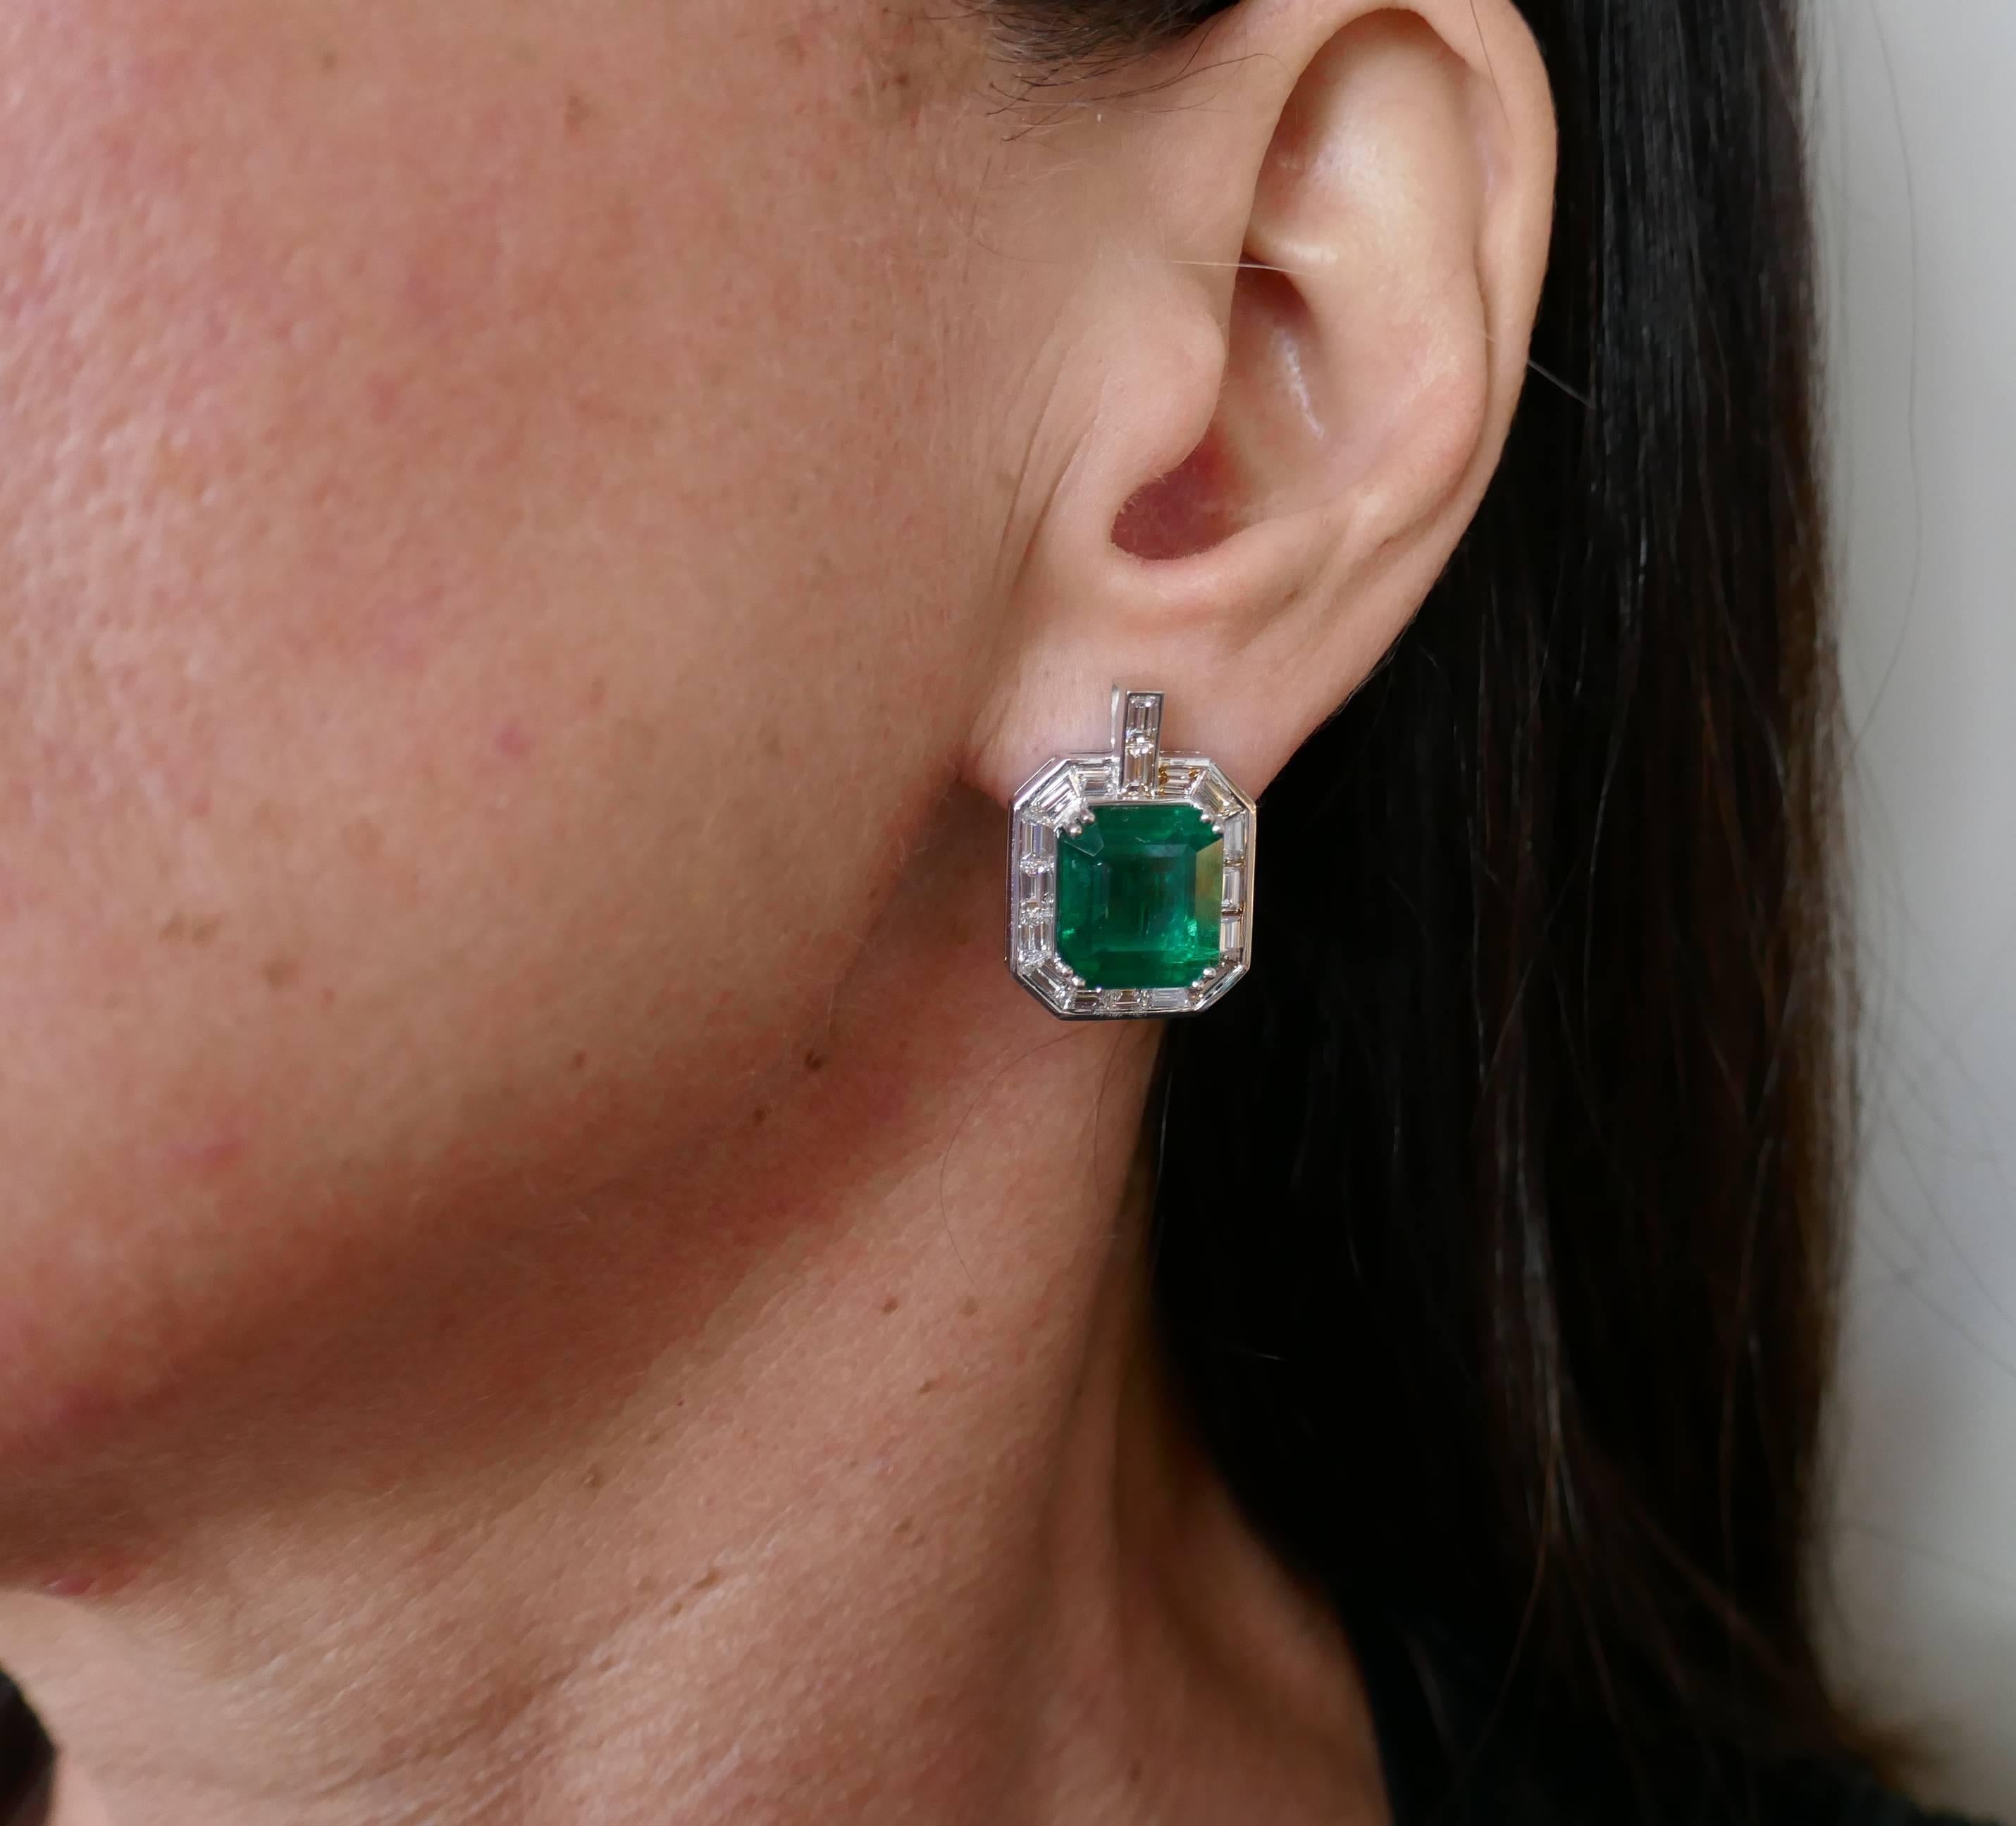 A pair of magnificent earrings featuring two Zambian emeralds. Classy, timeless and wearable, the earrings are a great addition to your jewelry collection.  
The emeralds are framed with a row of sleek baguette cut diamonds and set in 18 karat white